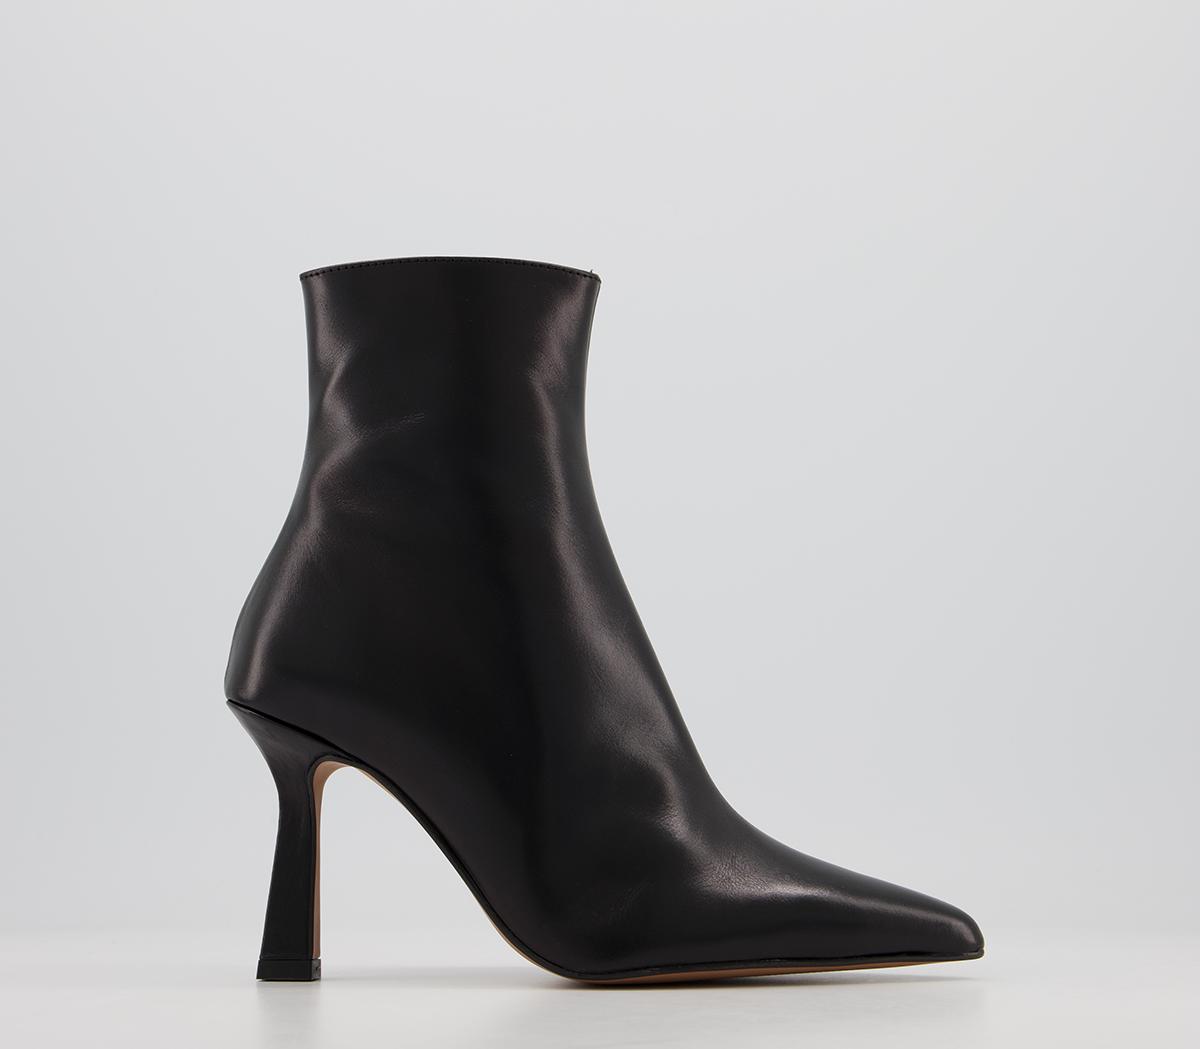 OFFICEAstonished Dressy Point BootsBlack Leather